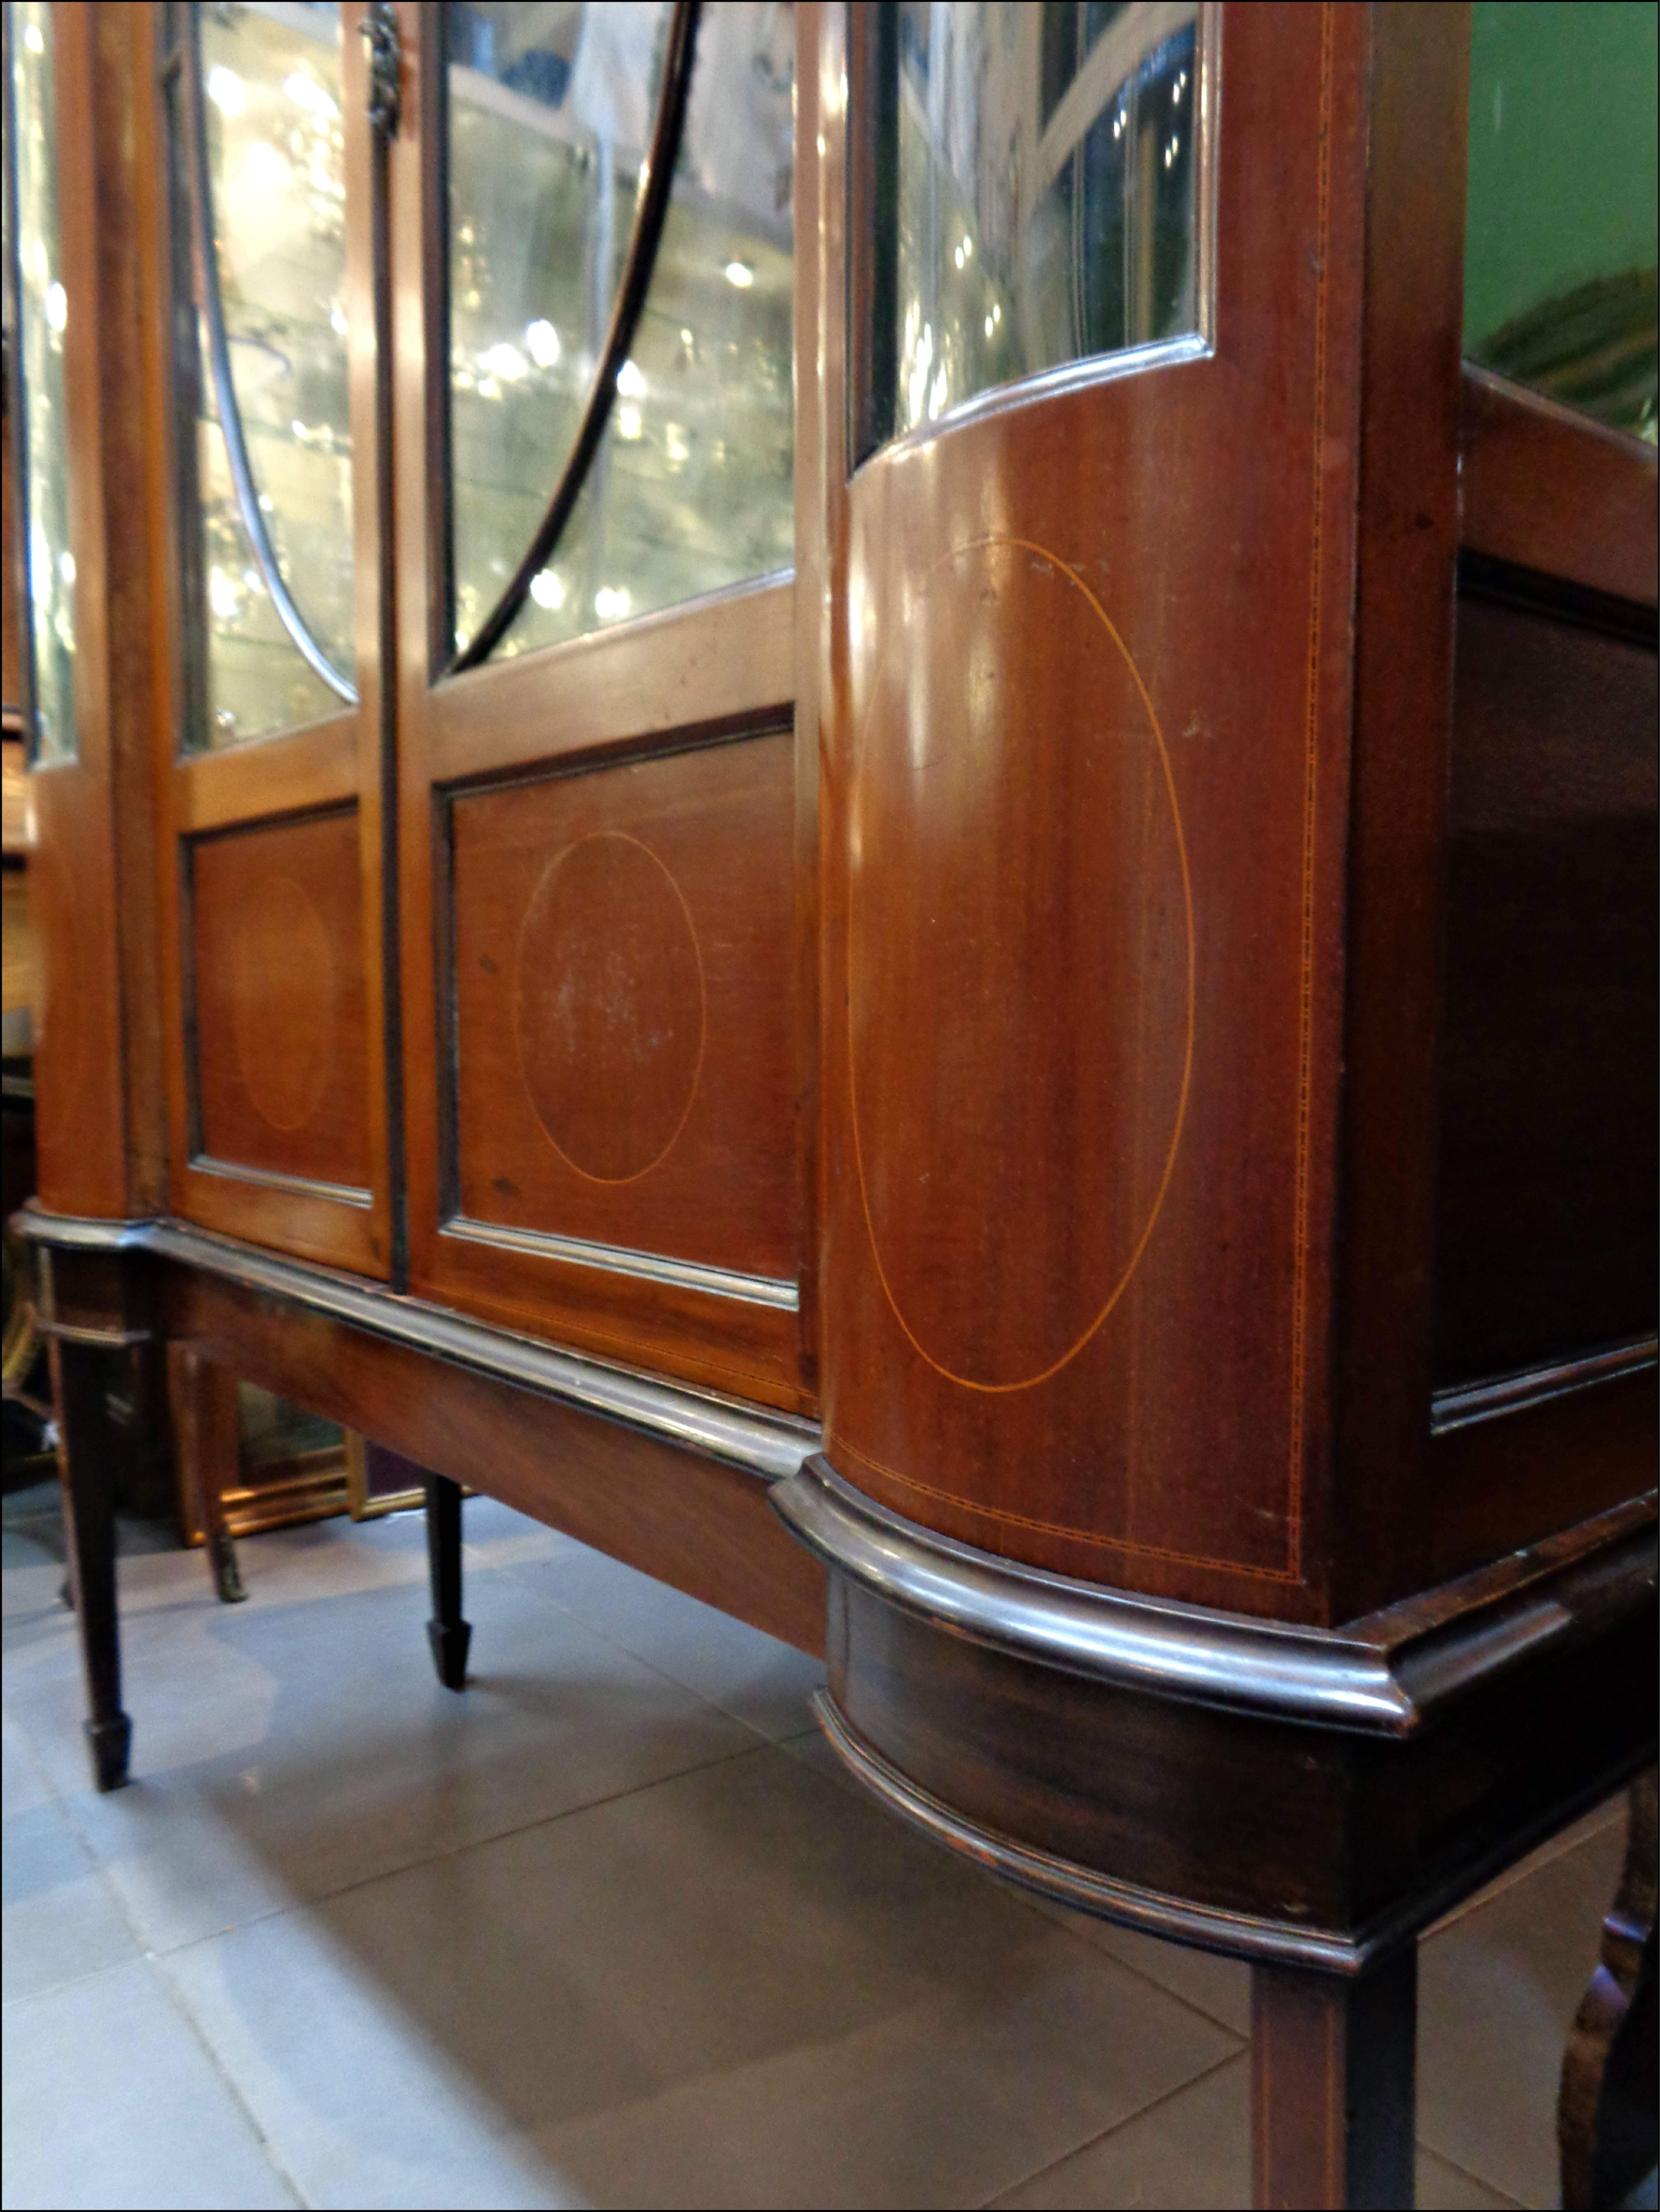 An English Edwardian glass display cabinet.
Made with fine mahogany veneer and classic frieze inlay 
with astragal glazed doors enclosing three shelves and tasteful bowed glass side wings, terminated with elegant tapering legs and a matching